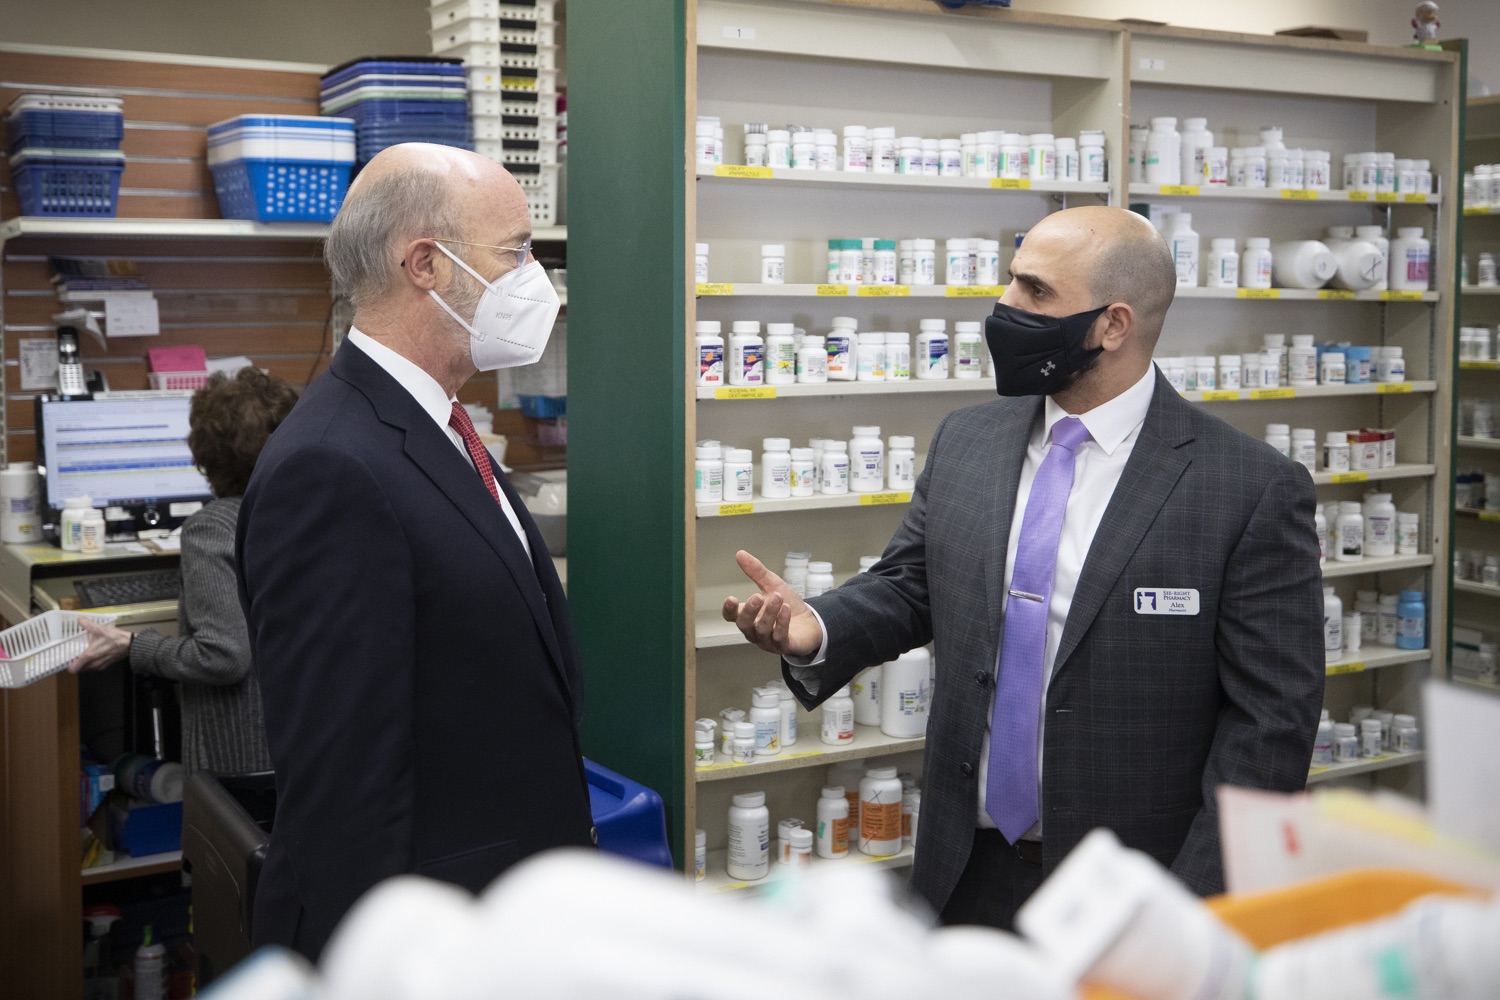 Alex Quaddoumi, R.Ph, Pharmacist, See-Right Pharmacy and Pennsylvania Governor Tom Wolf speaking in the pharmacy. Governor Tom Wolf today visited See-Right Pharmacy in Harrisburg to learn more about how the local, neighborhood pharmacy is vaccinating community members and to talk about COVID-19 vaccine hesitancy in Pennsylvania. Harrisburg, PA  April 22, 2021<br><a href="https://filesource.amperwave.net/commonwealthofpa/photo/18704_gov_seeRight_dz_003.jpg" target="_blank">⇣ Download Photo</a>